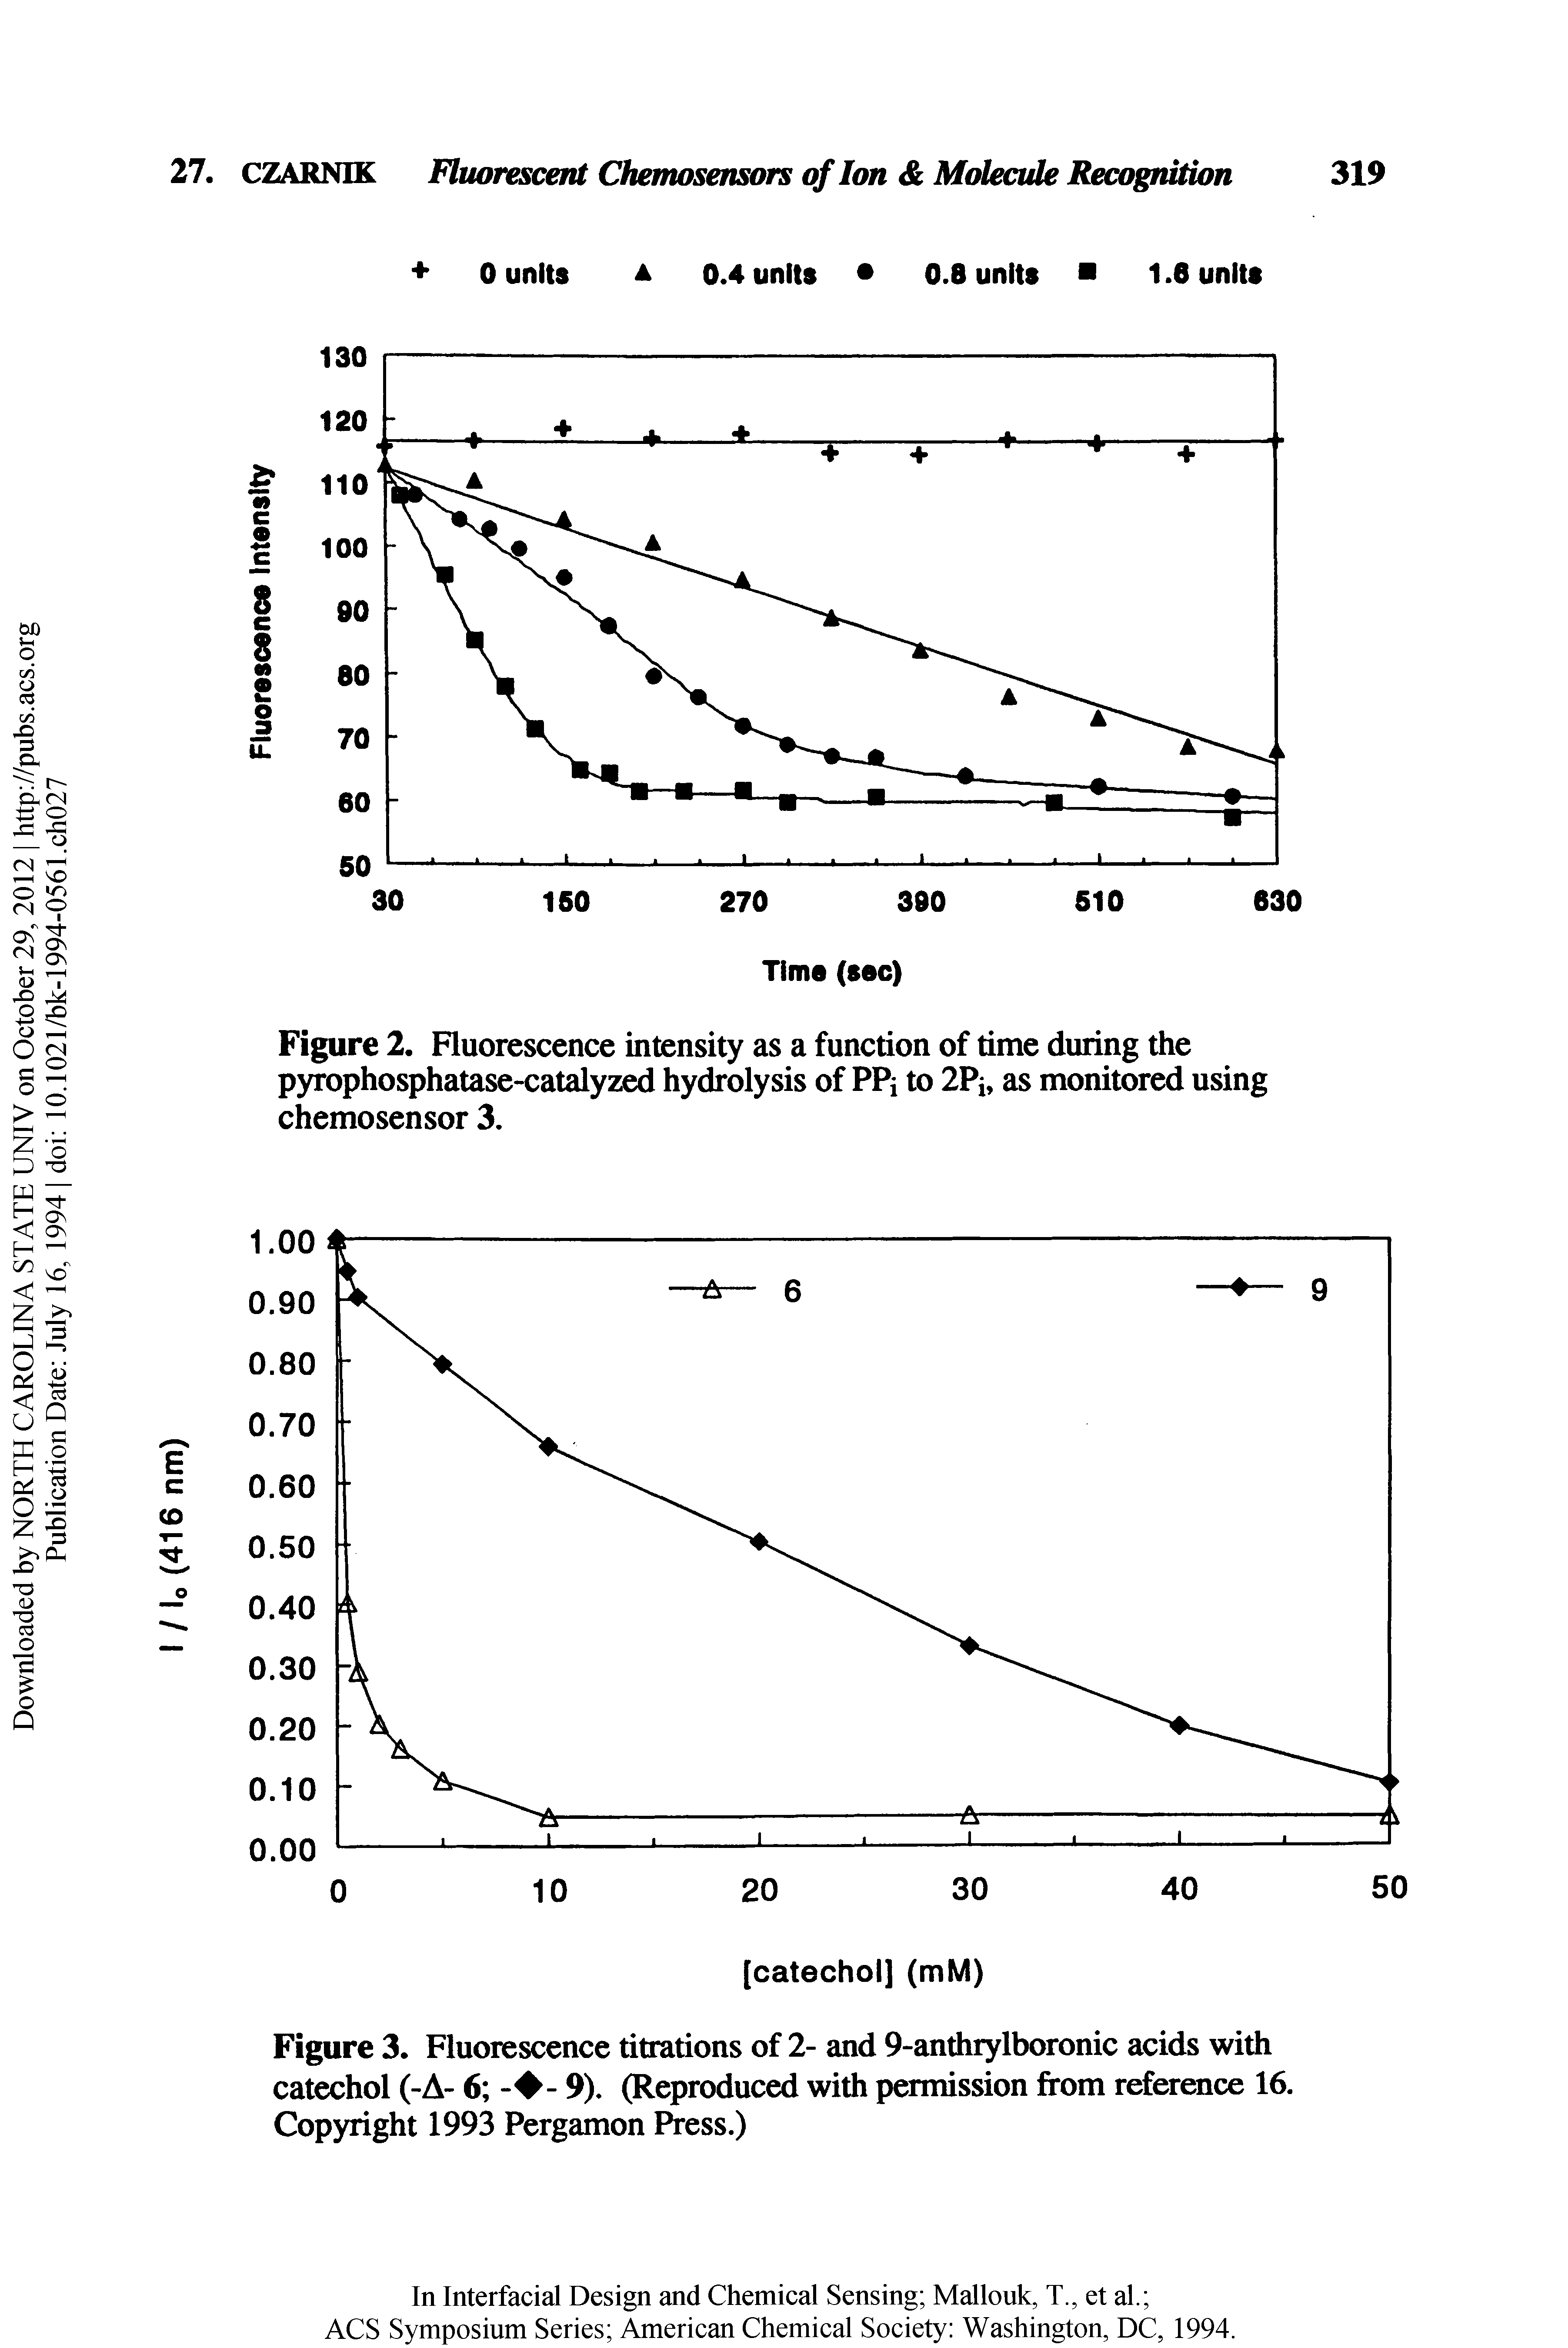 Figure 2. Fluorescence intensity as a function of time during the pyrophosphatase-catalyzed hydrolysis of PPi to 2Pi, as monitored using chemosensor 3.